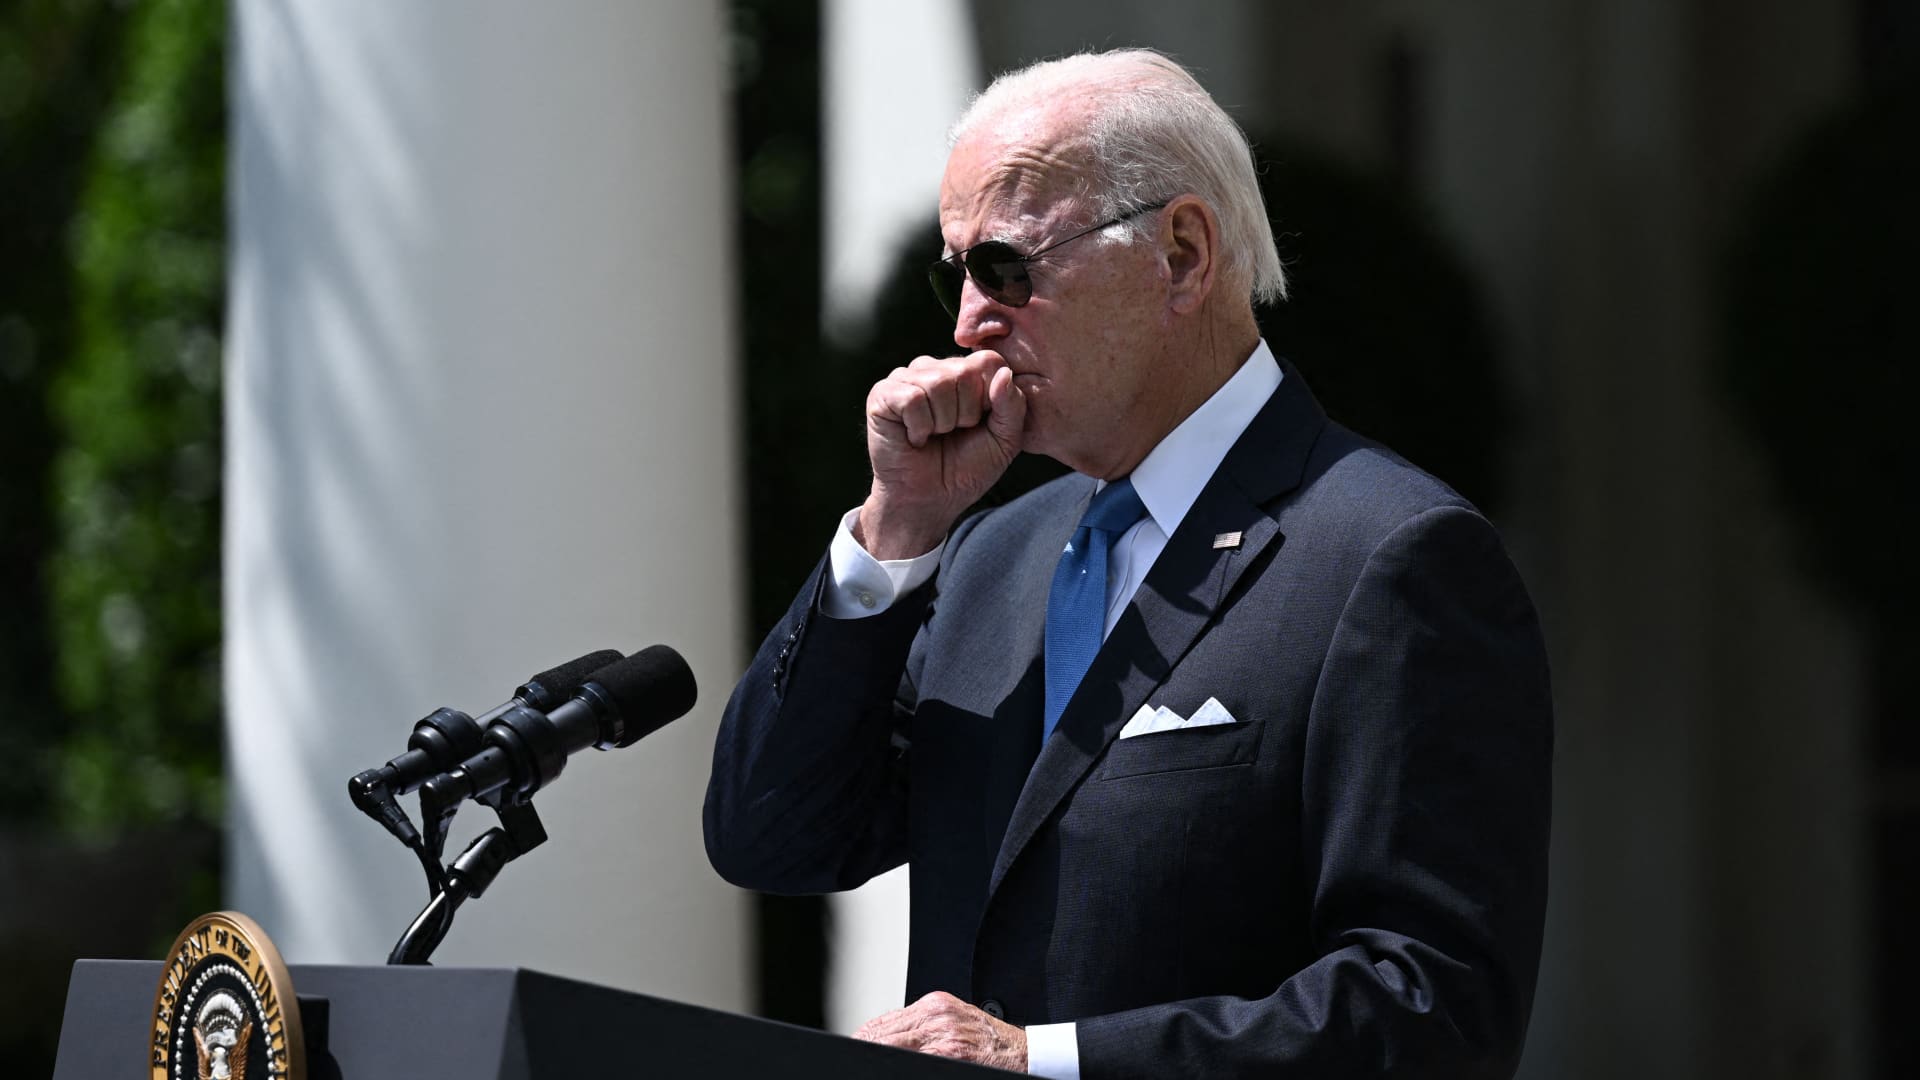 Watch live: Biden speaks about his negative Covid test and the broader pandemic effort - CNBC